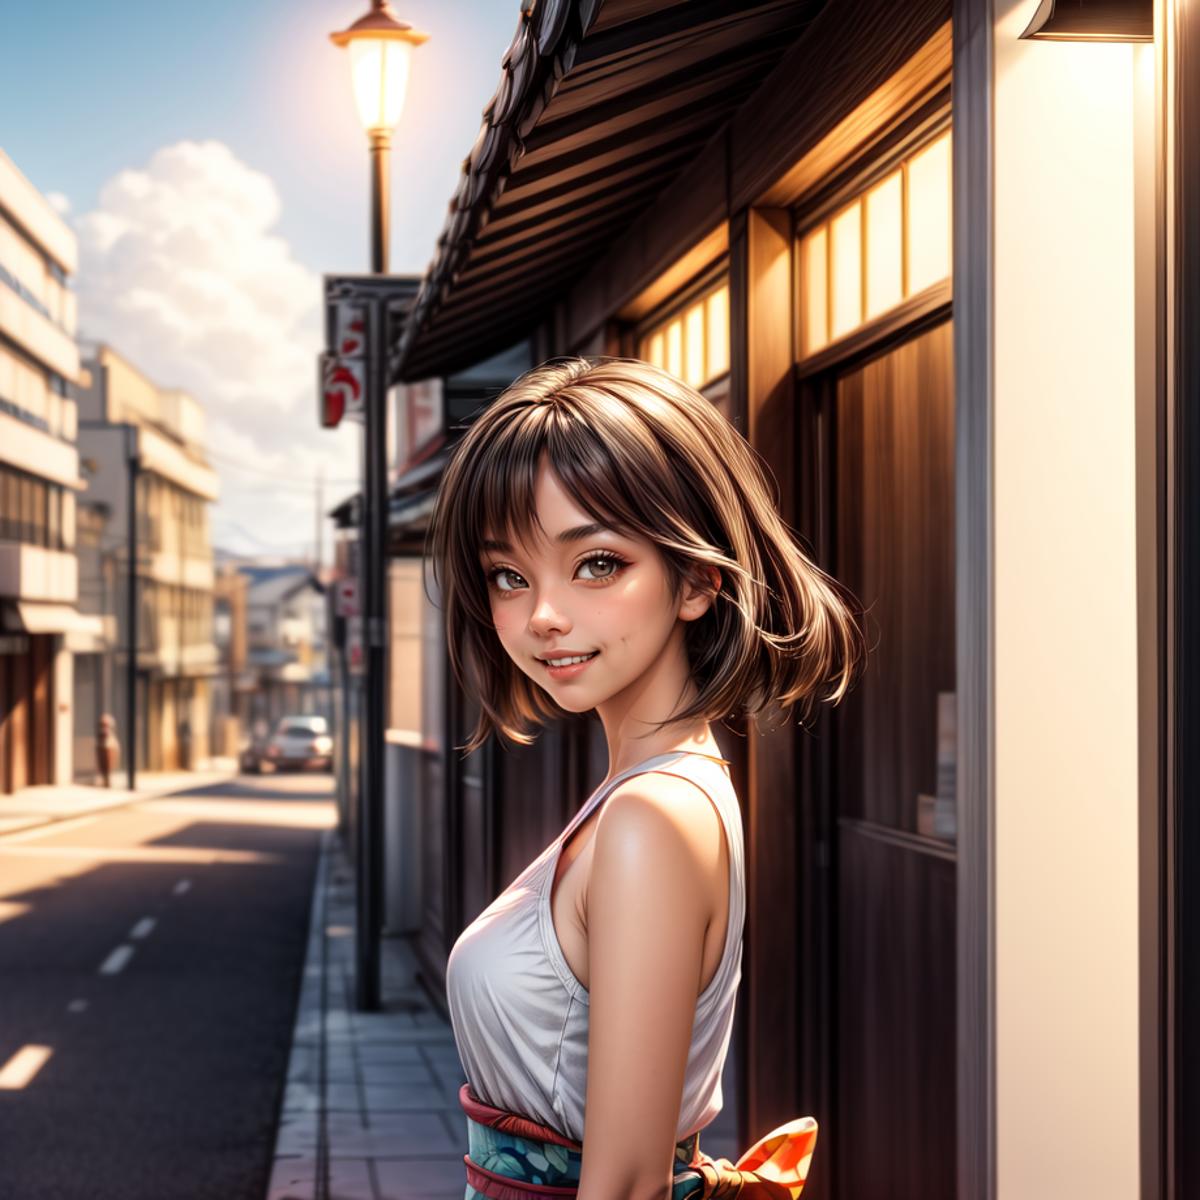 Anime-style illustration of a girl smiling with a flower in her hair, wearing a white dress, and standing on a city street.